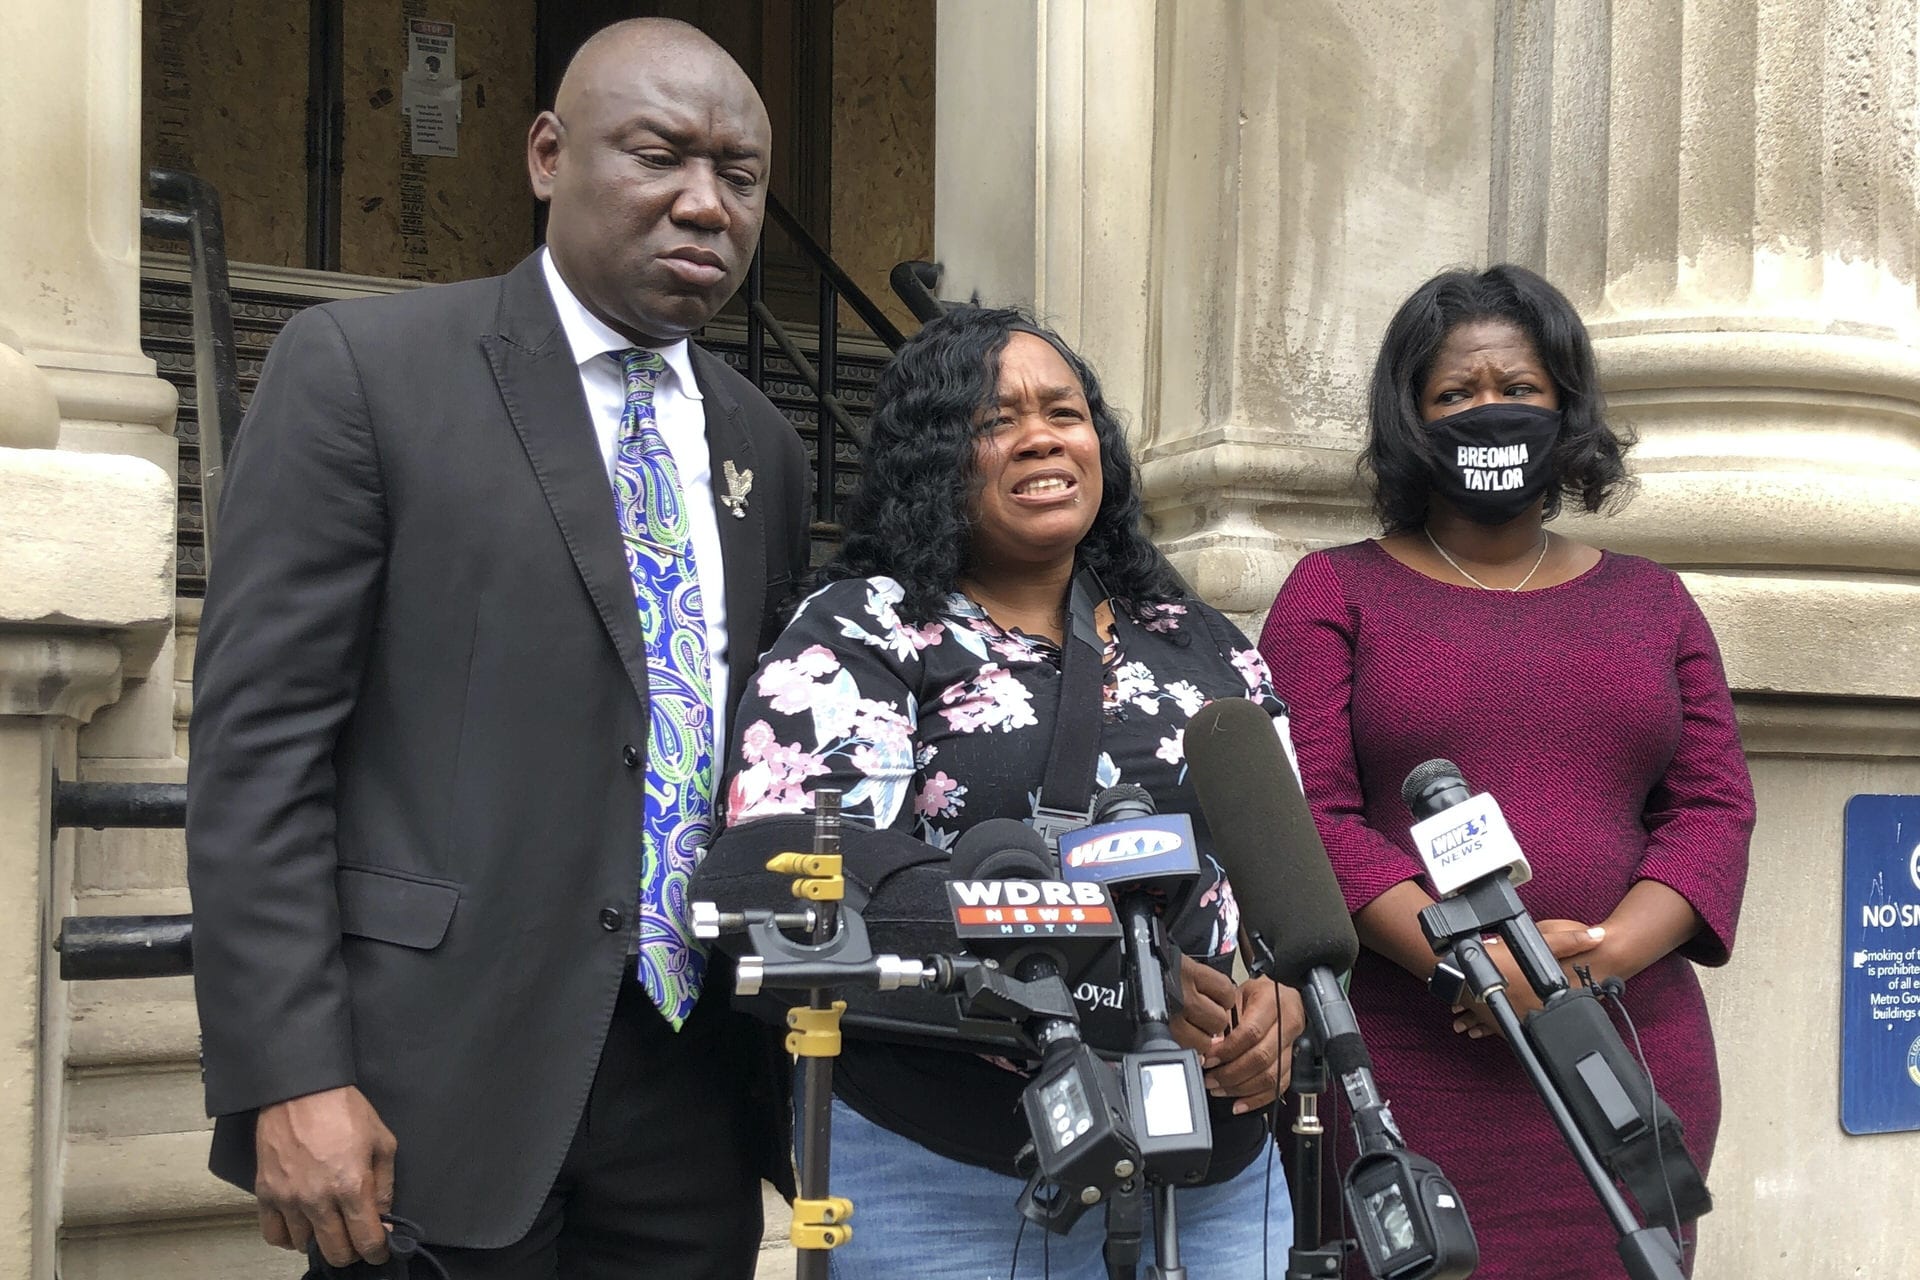 The $12 million Breonna Taylor settlement sparks reform, echoes #SayHerName cases